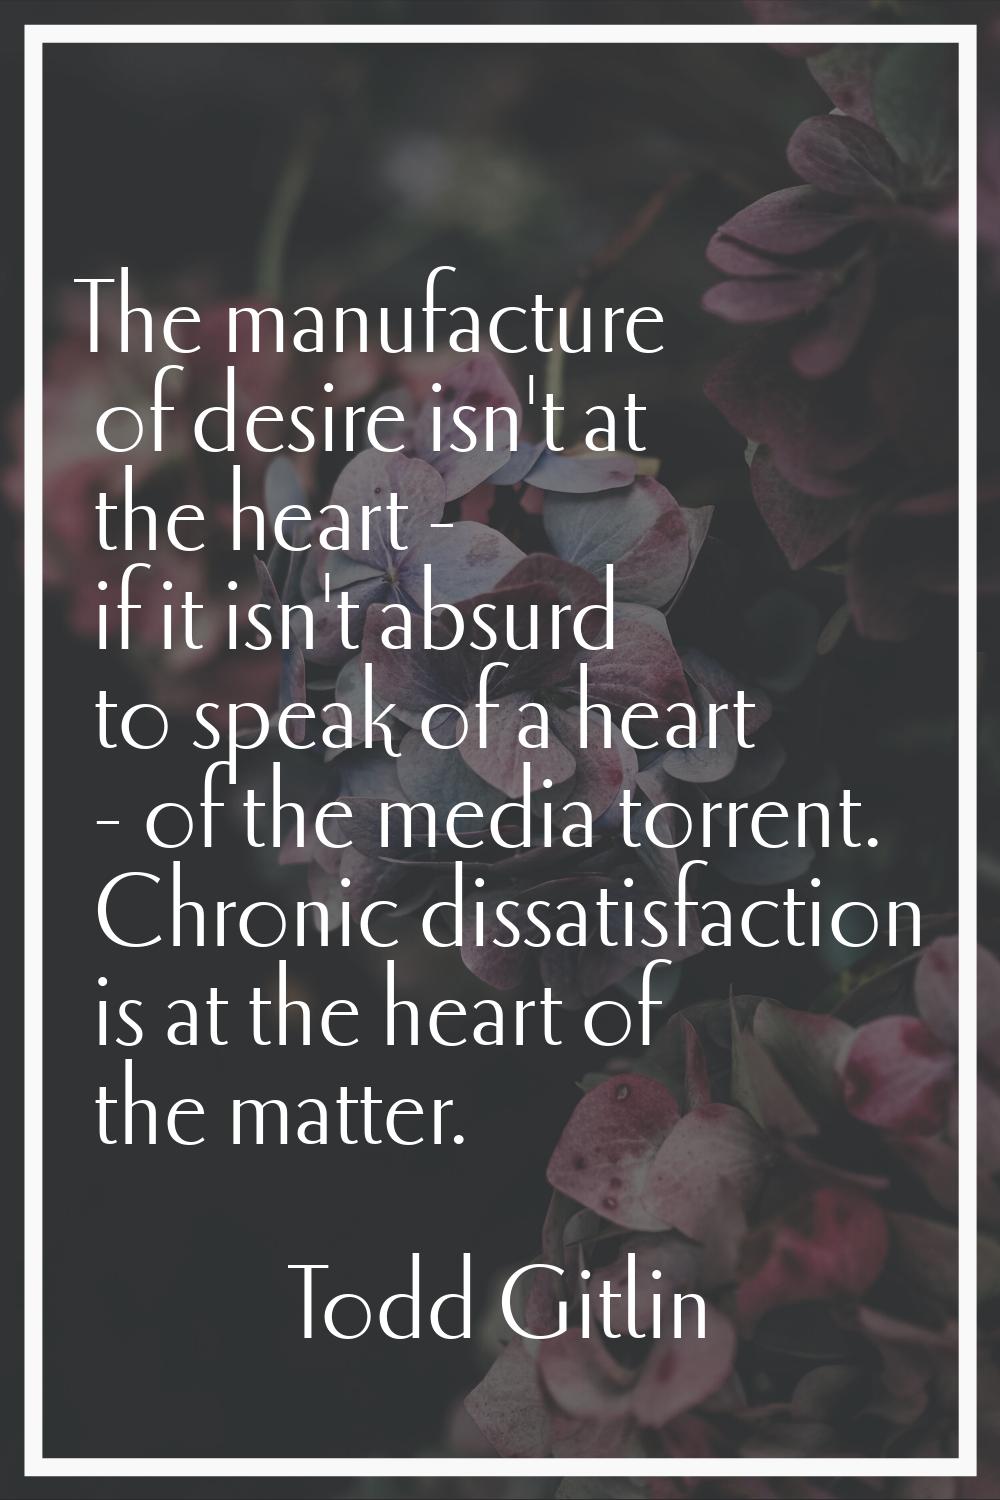 The manufacture of desire isn't at the heart - if it isn't absurd to speak of a heart - of the medi